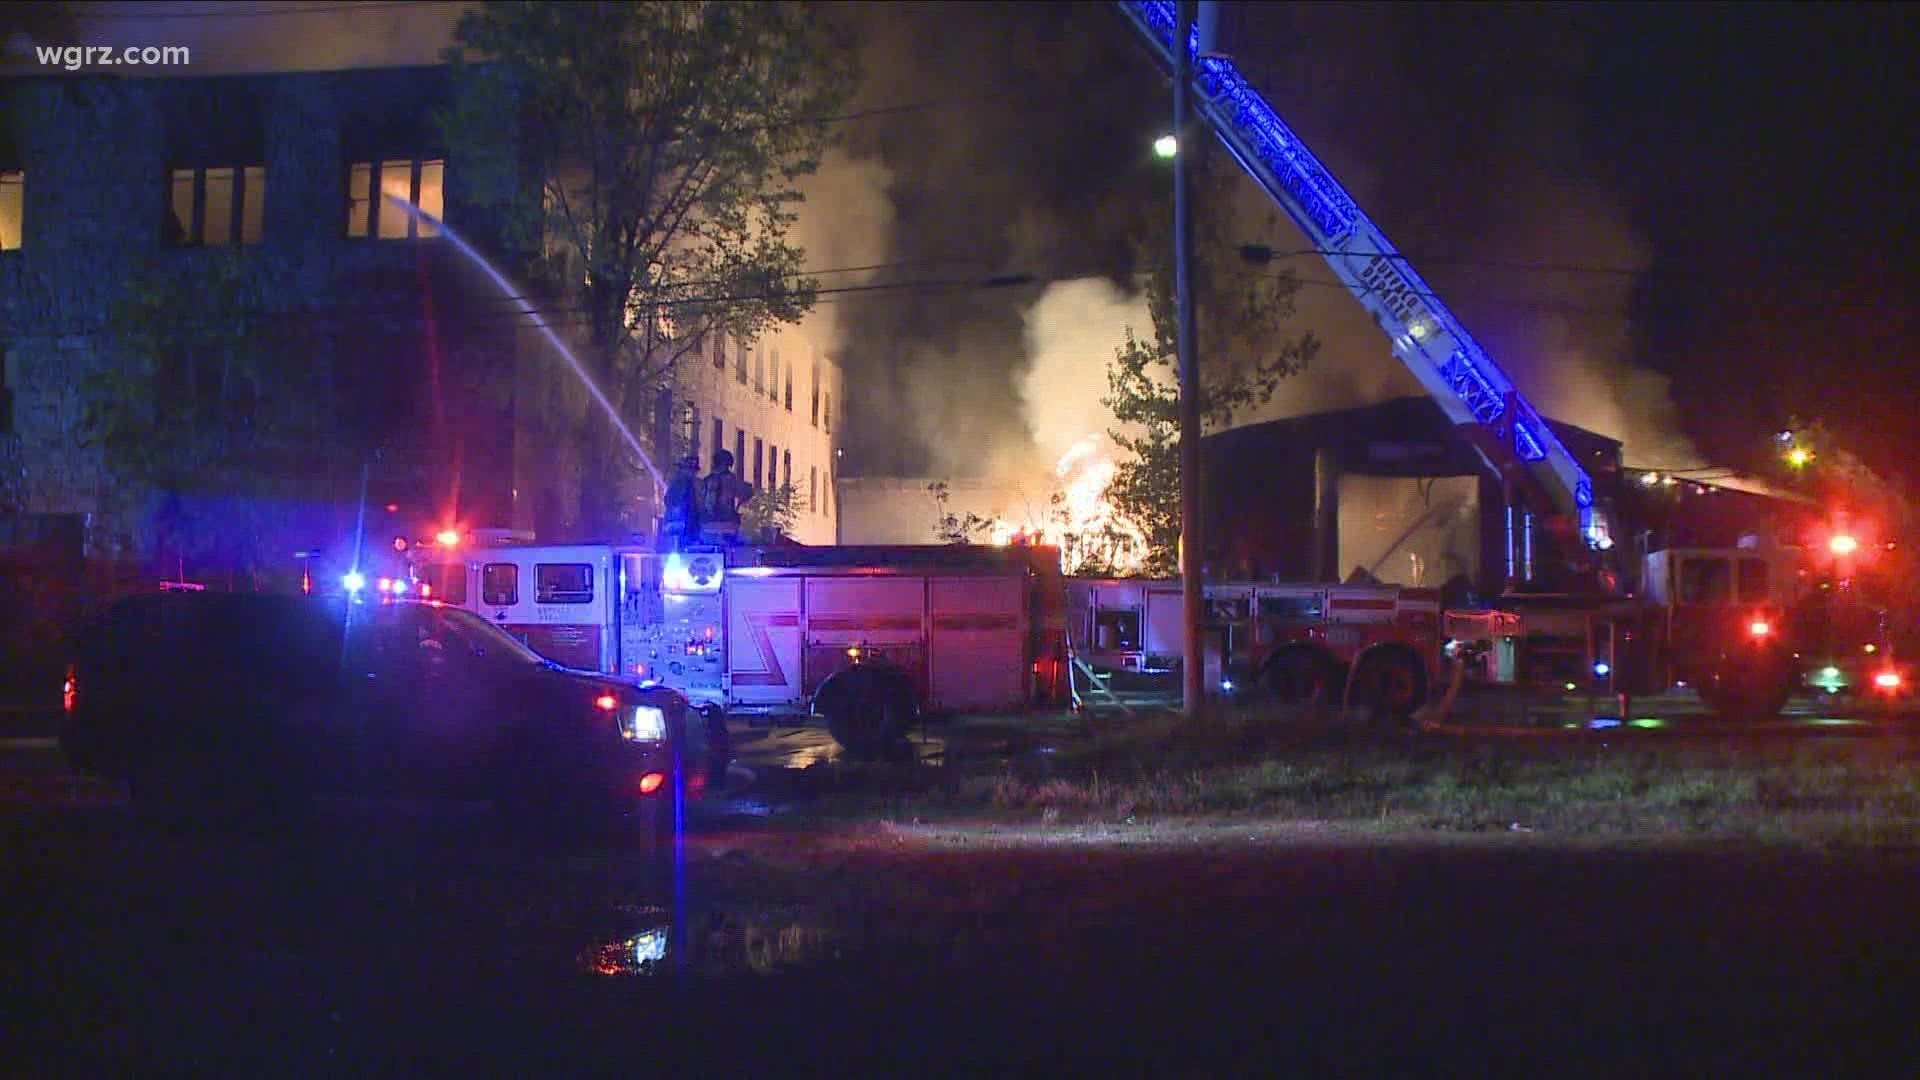 The fire broke out around 2 a.m. on Metcalfe Street near Clinton Street.